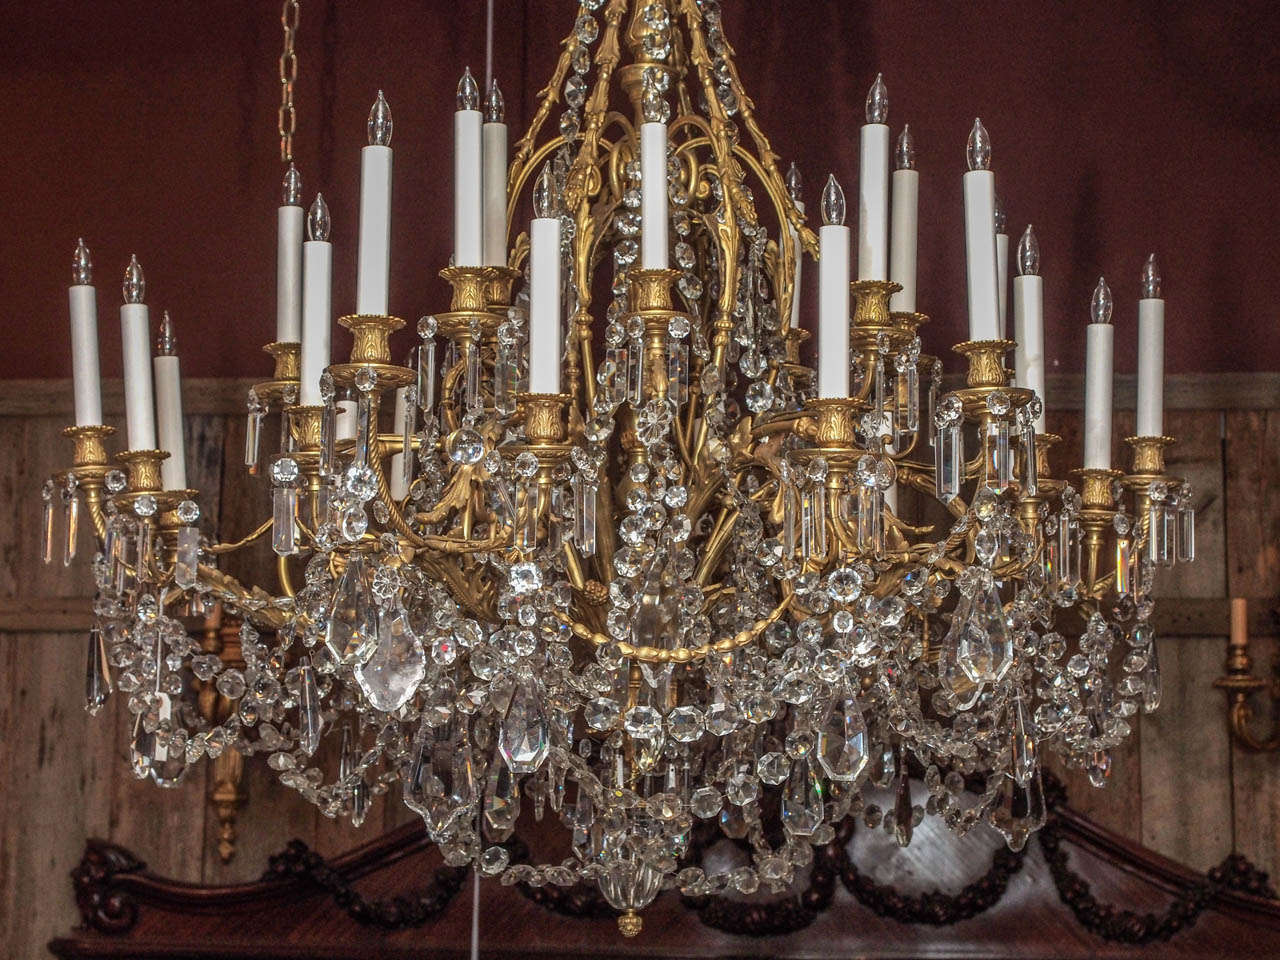 Antique French Napoleon III Baccarat Crystal and Ormolu Chandelier For Sale 1